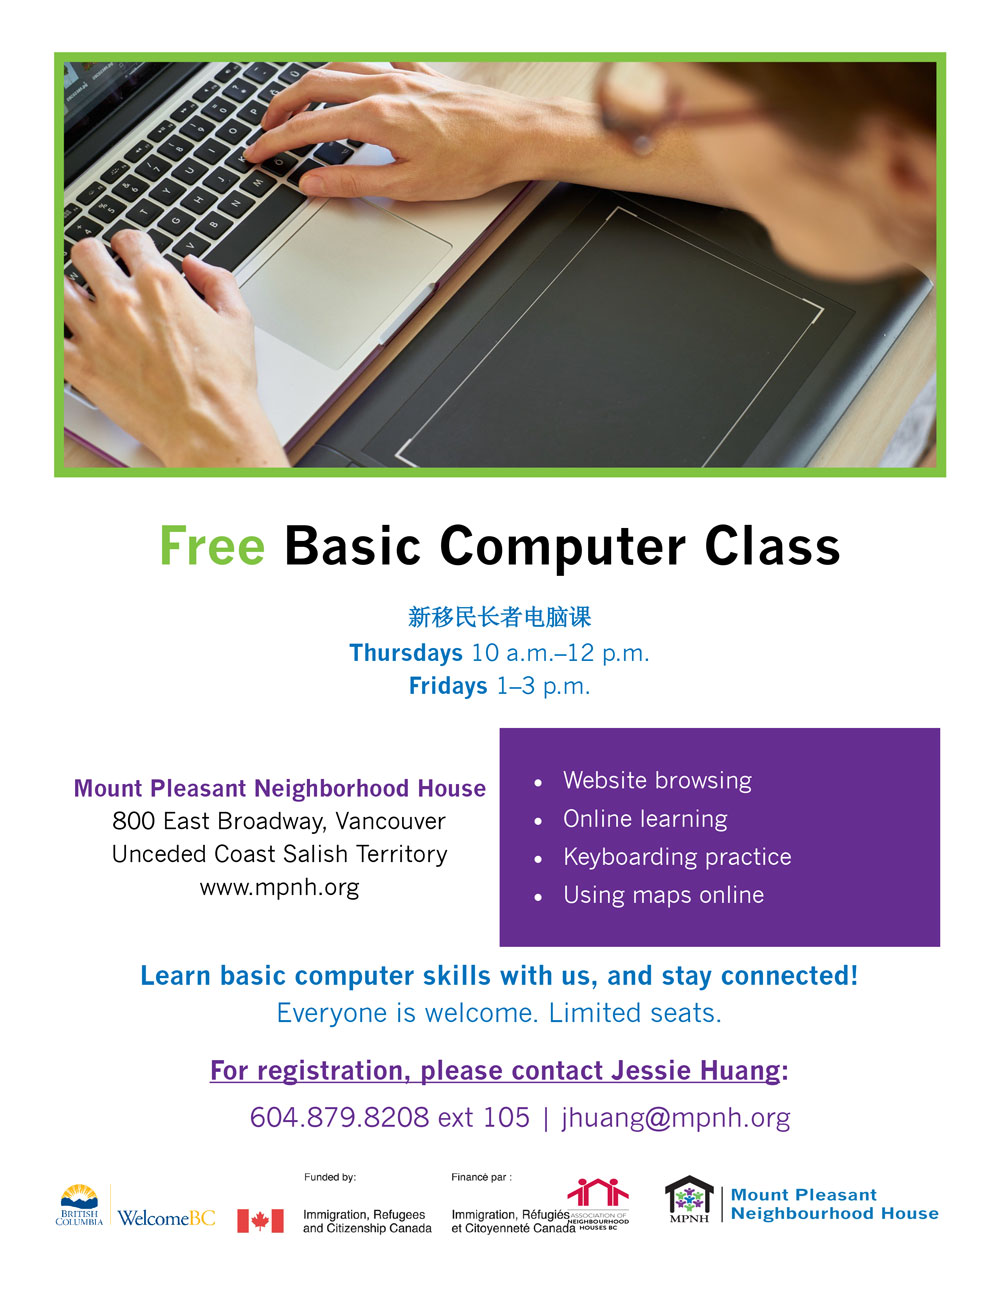 An image of the poster with a photo of a person wearing glasses, and typing on a laptop.